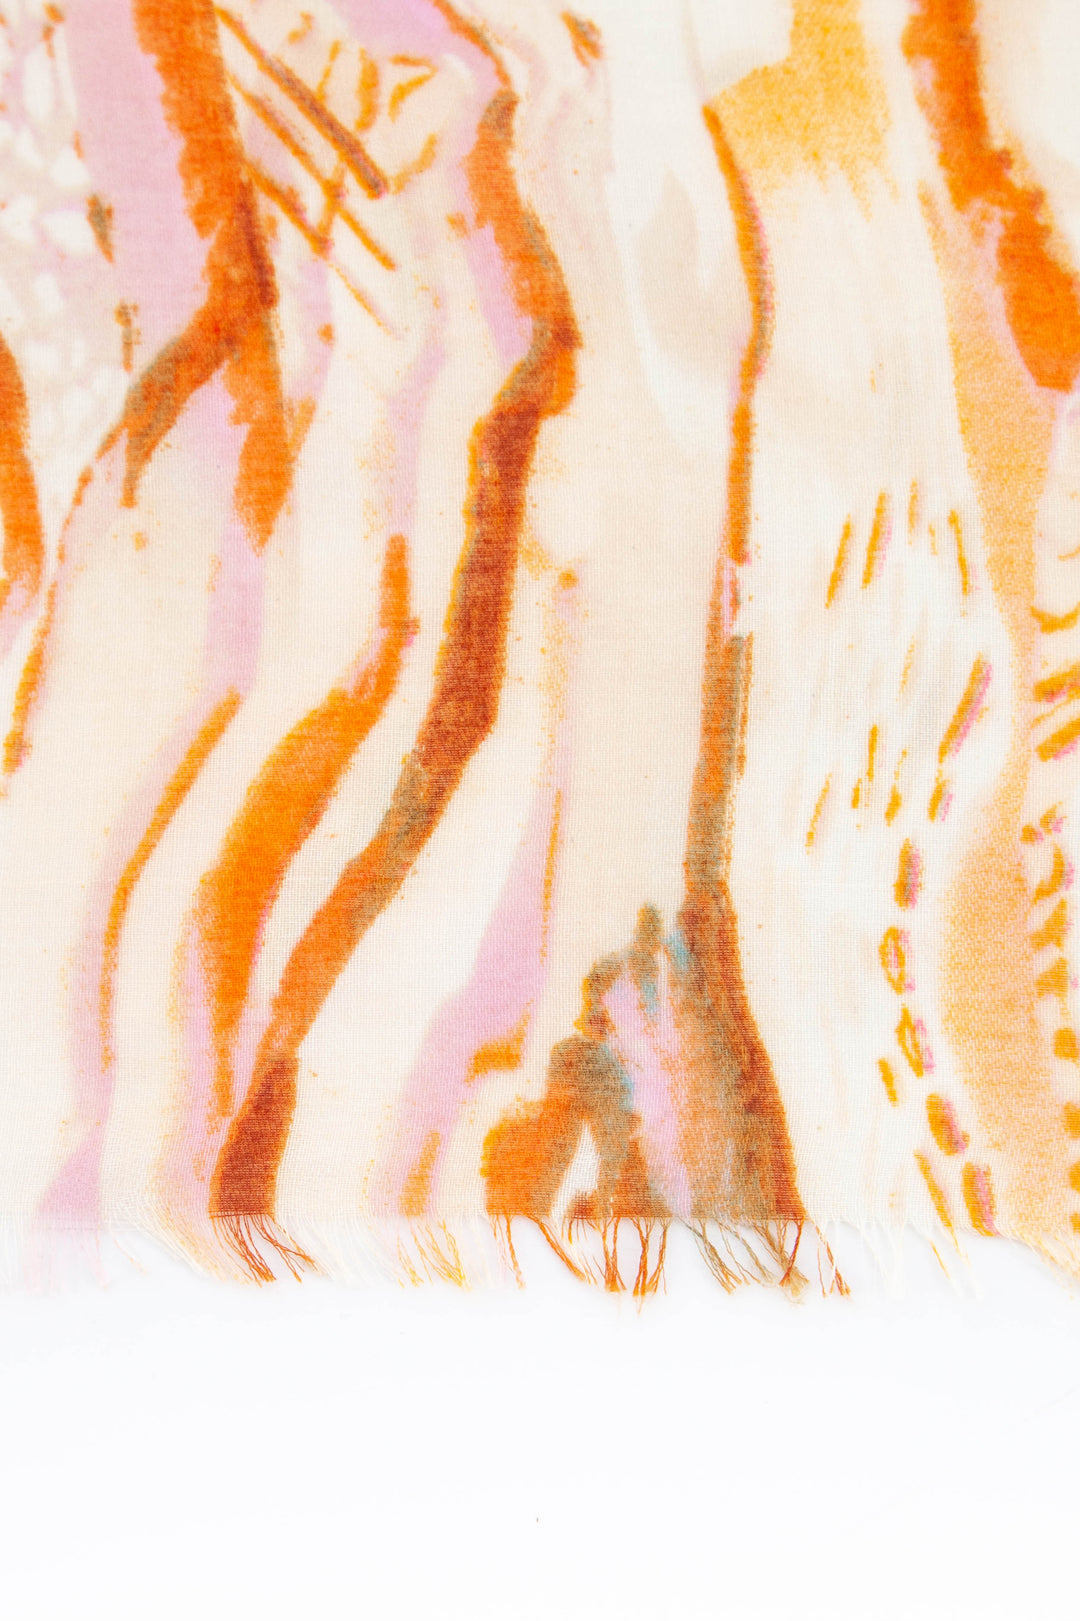 close up of the fringed edge and gold foil accents on the lightweight orange scarf